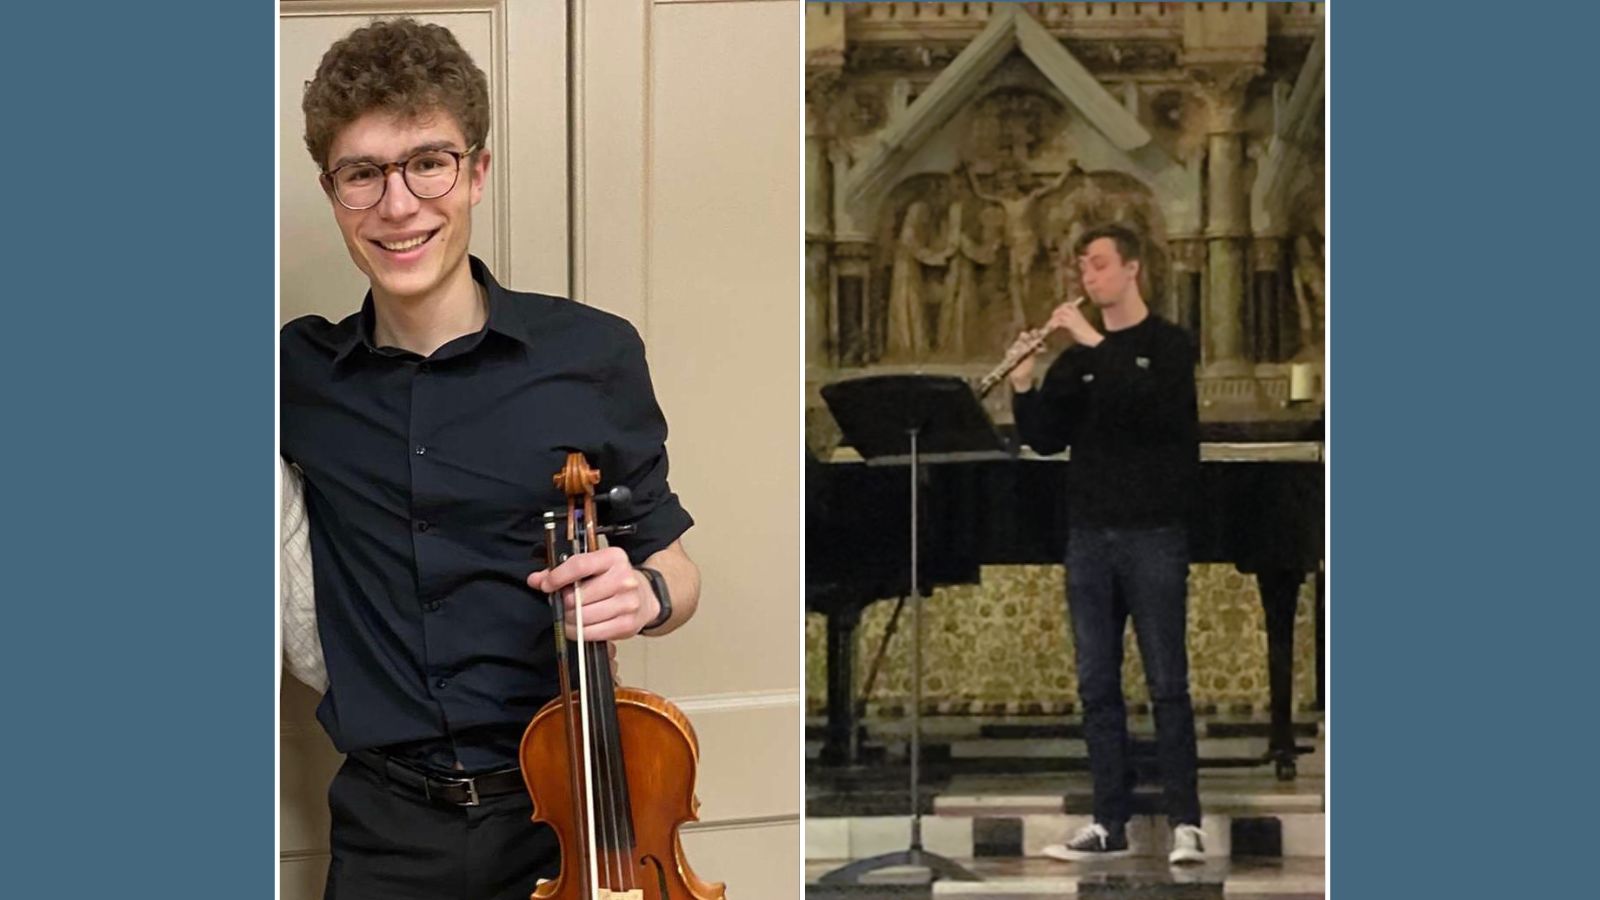 Side by side photos of Tom Kirby playing the oboe and Matthew Eldridge holding a violin